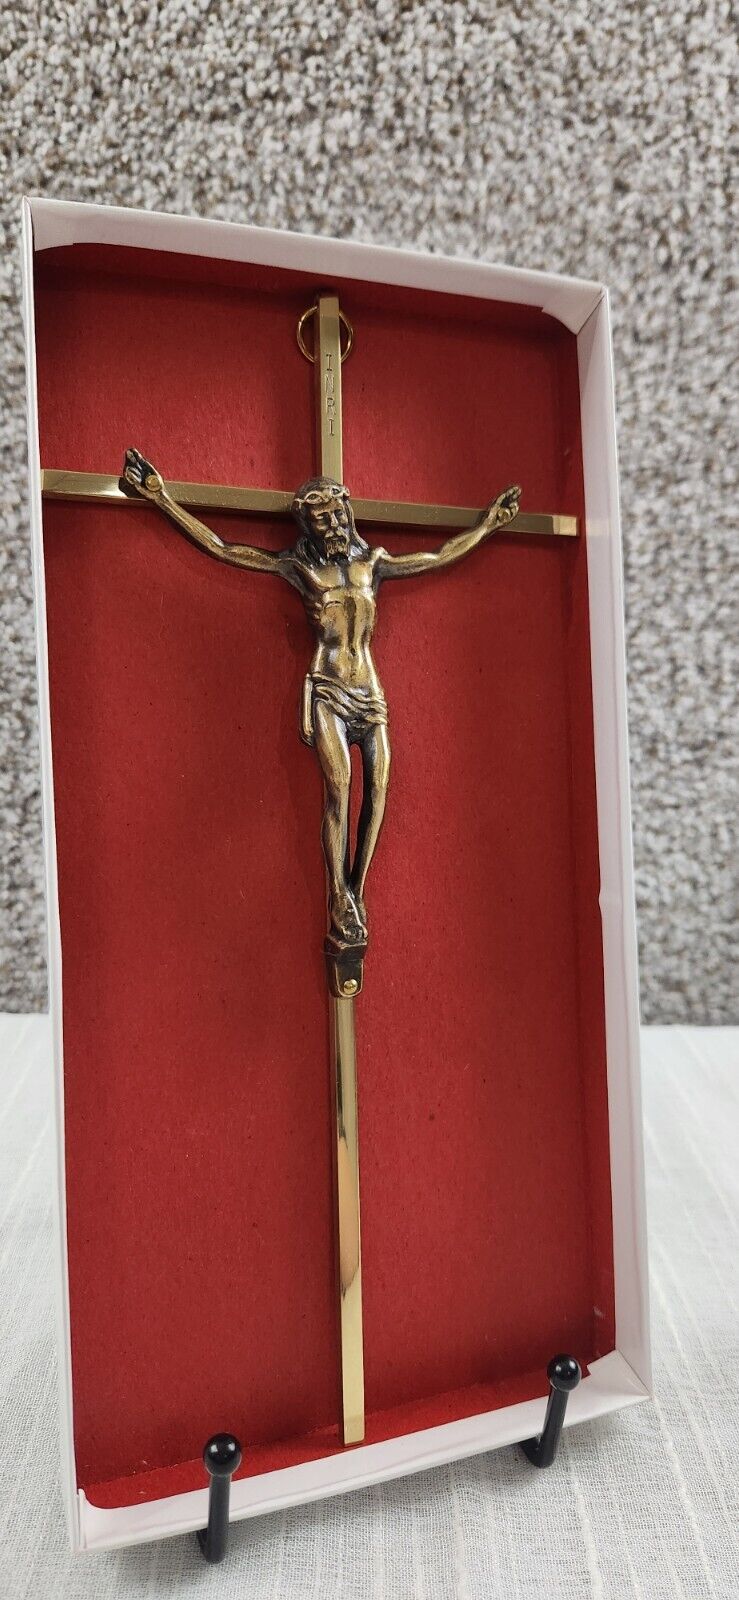 Jesus on the Cross Crucifix Gold Toned Religious Metal Wall Hanging In Gift Box